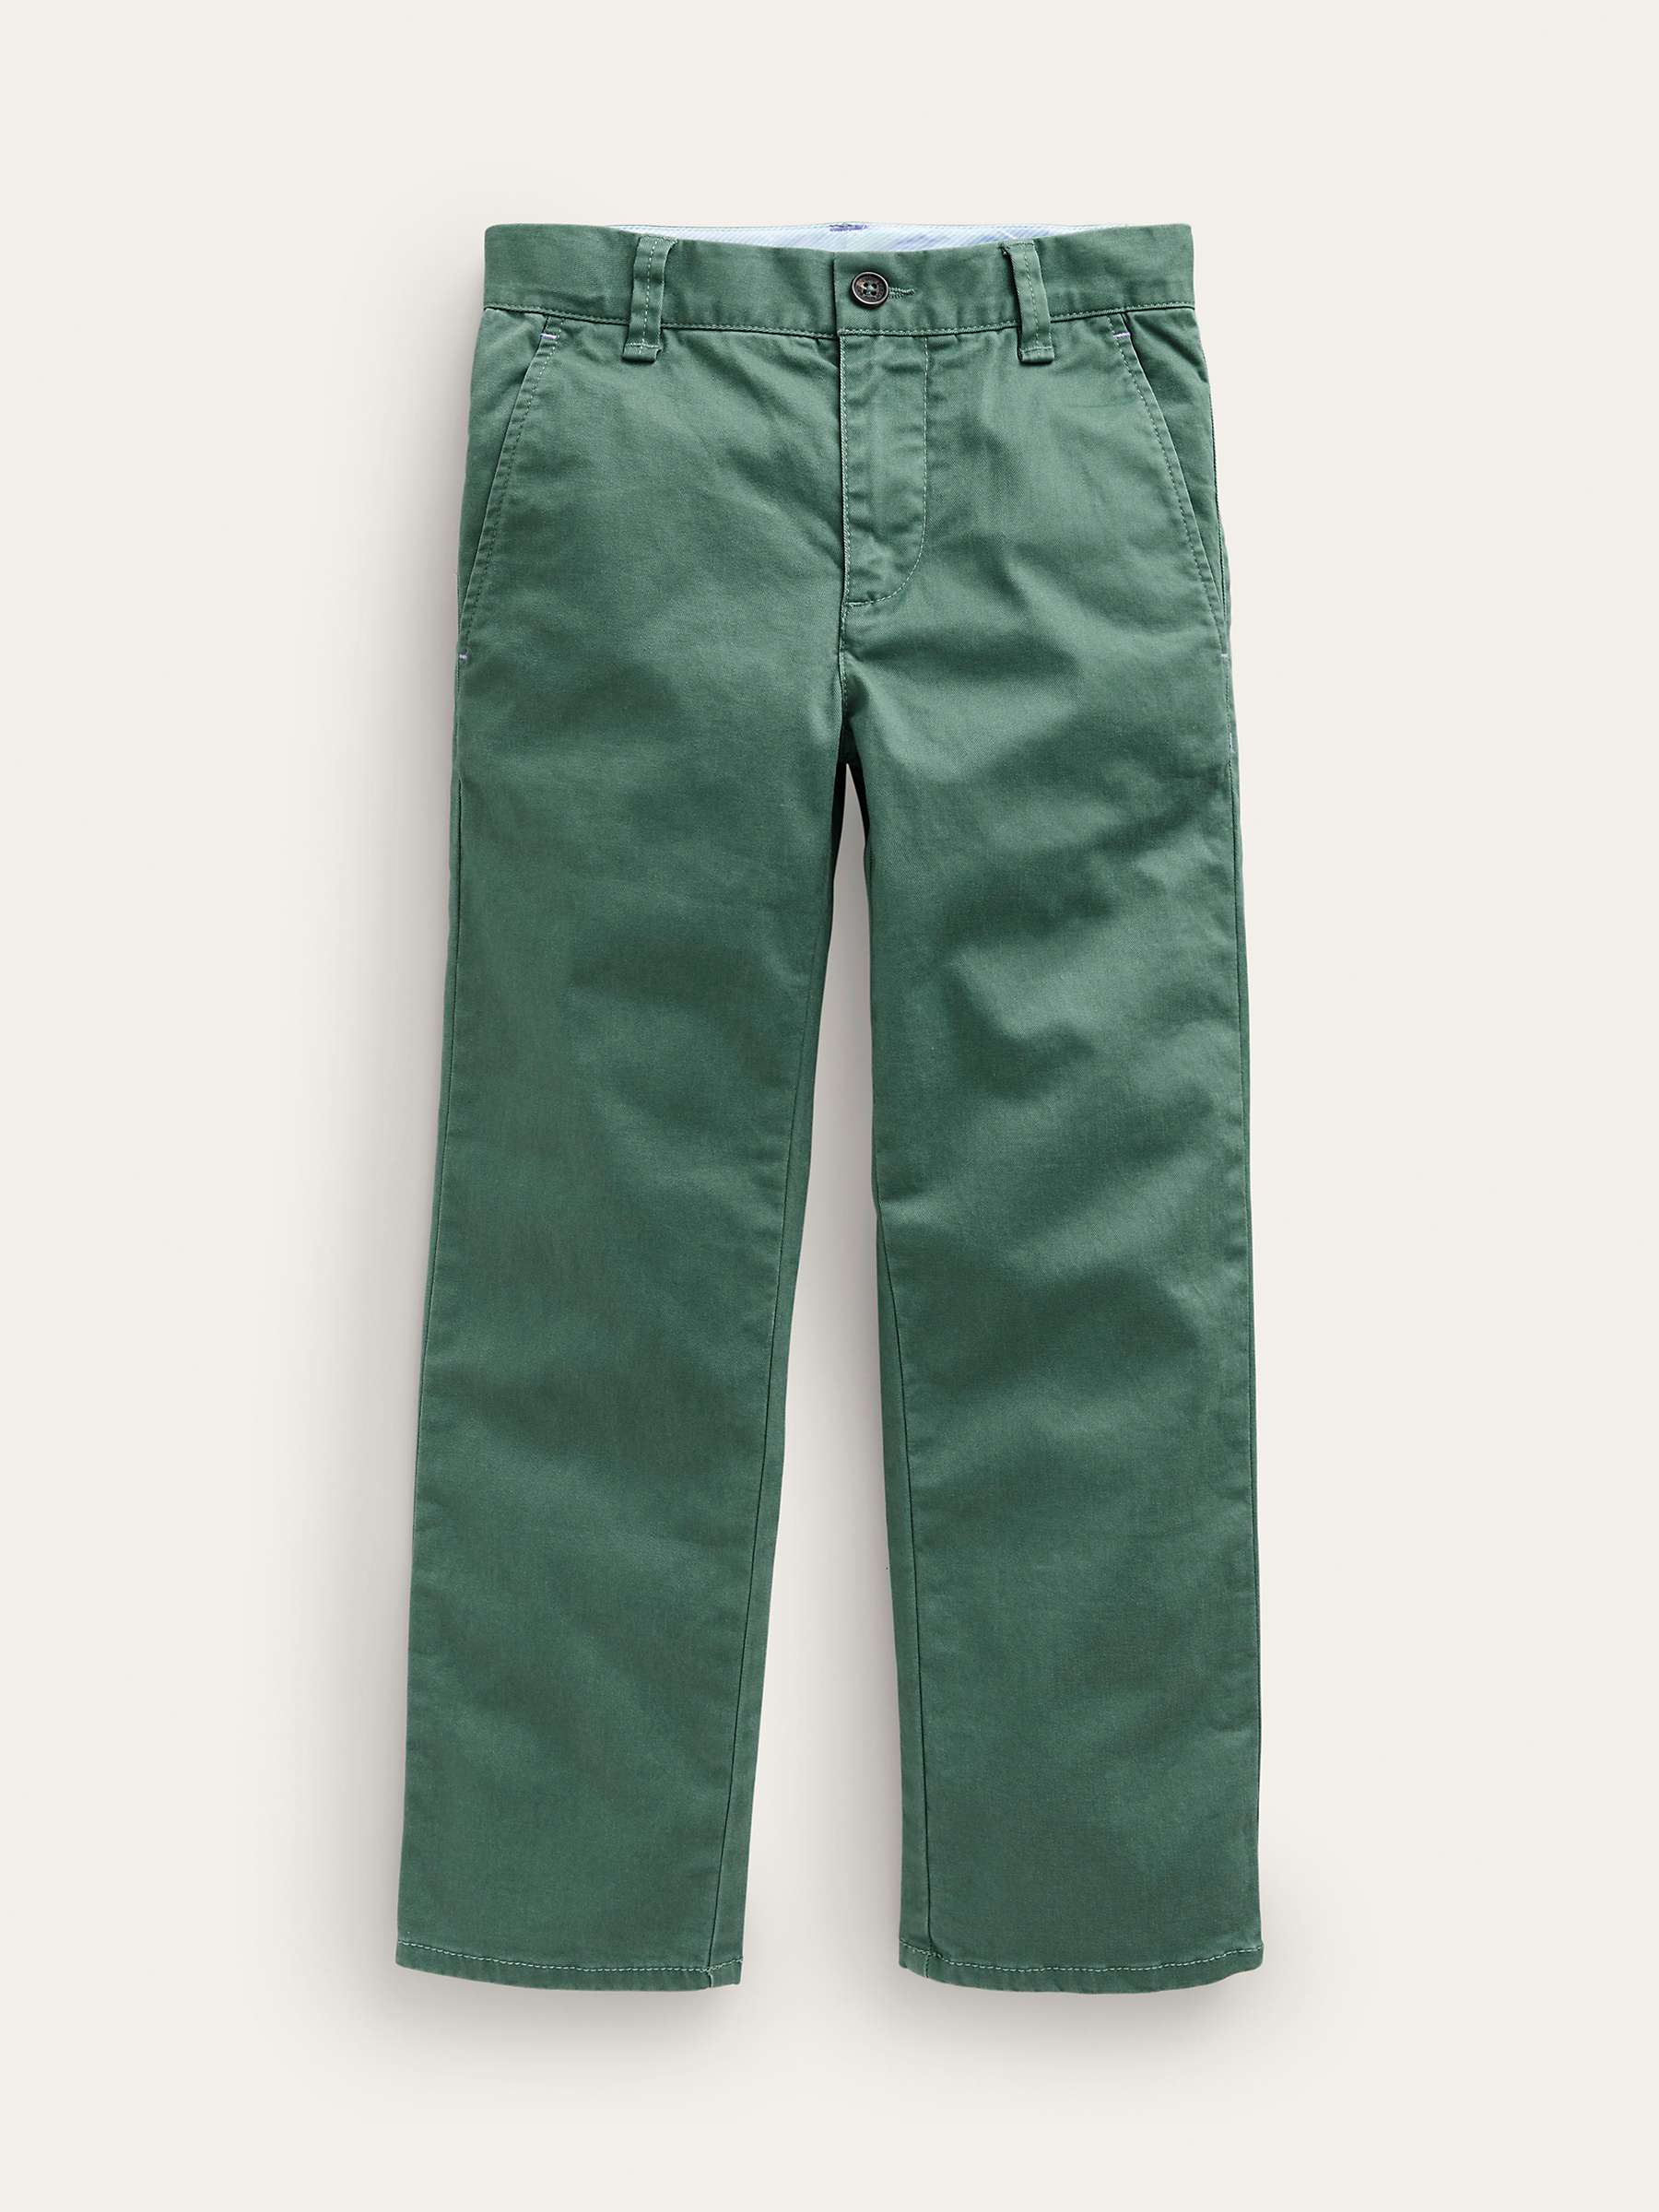 Buy Mini Boden Kids' Classic Relax Fit Chinos, Spruce Green Online at johnlewis.com